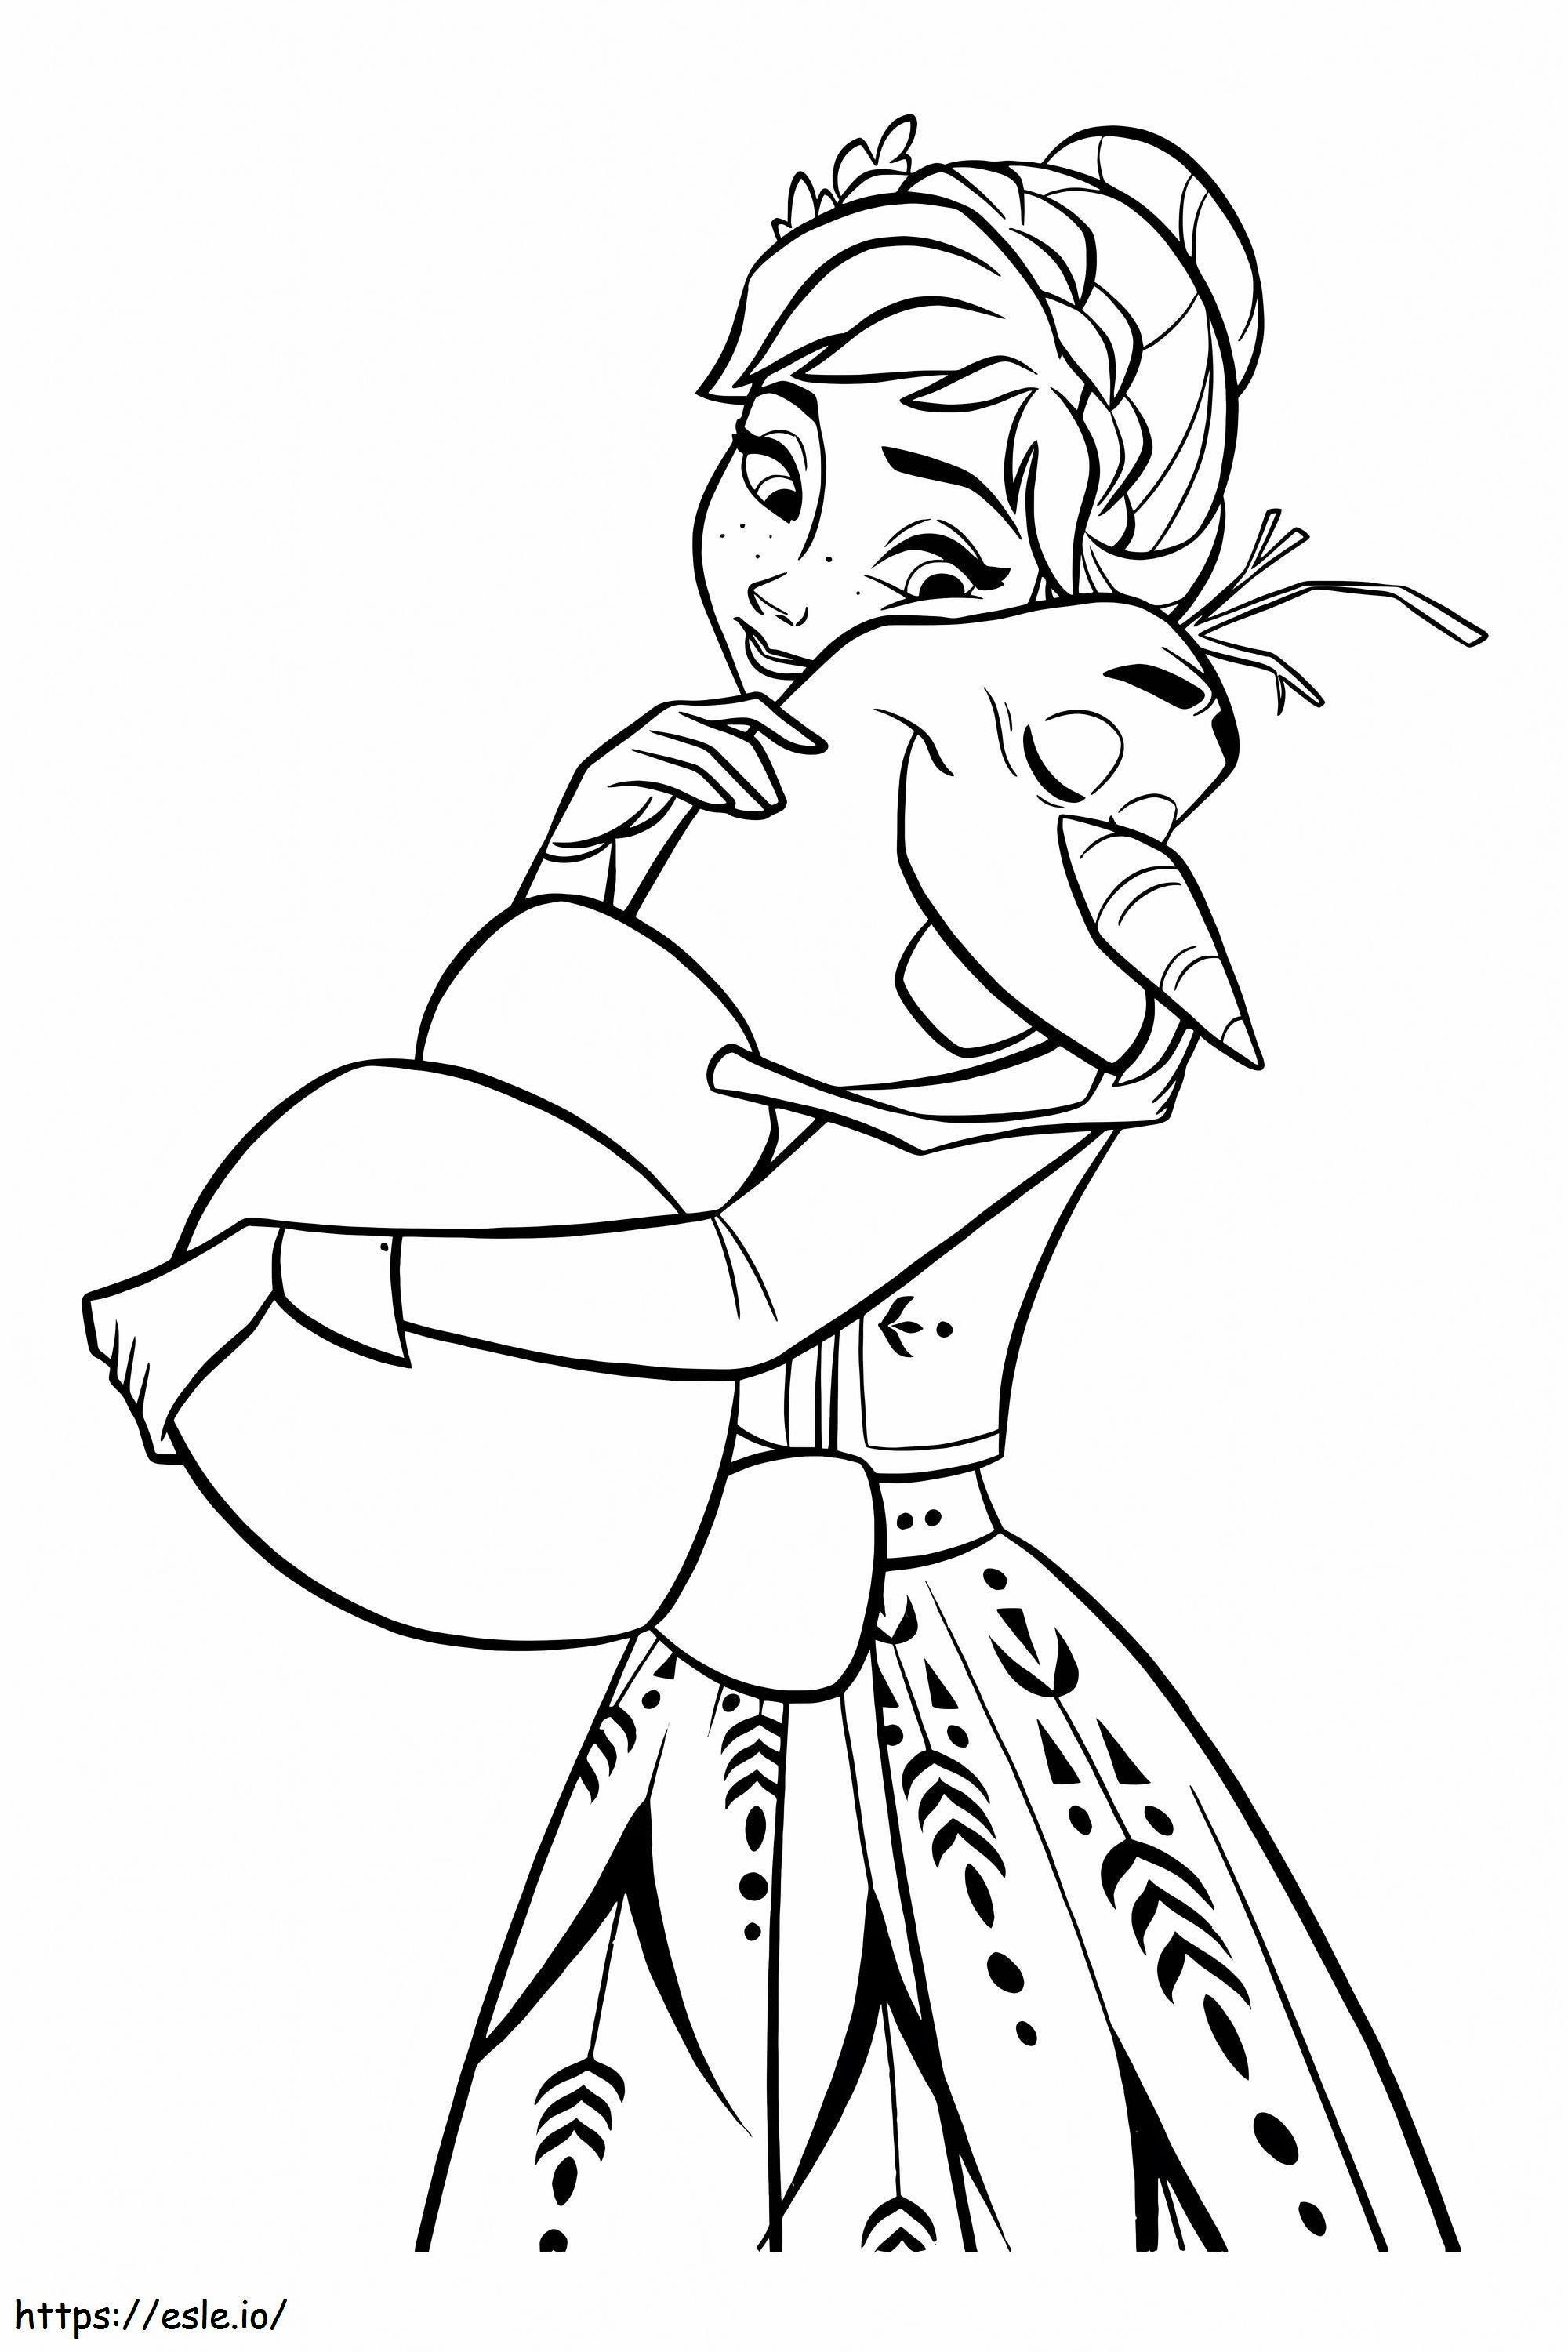 Frozen 2 Olaf And Anna coloring page